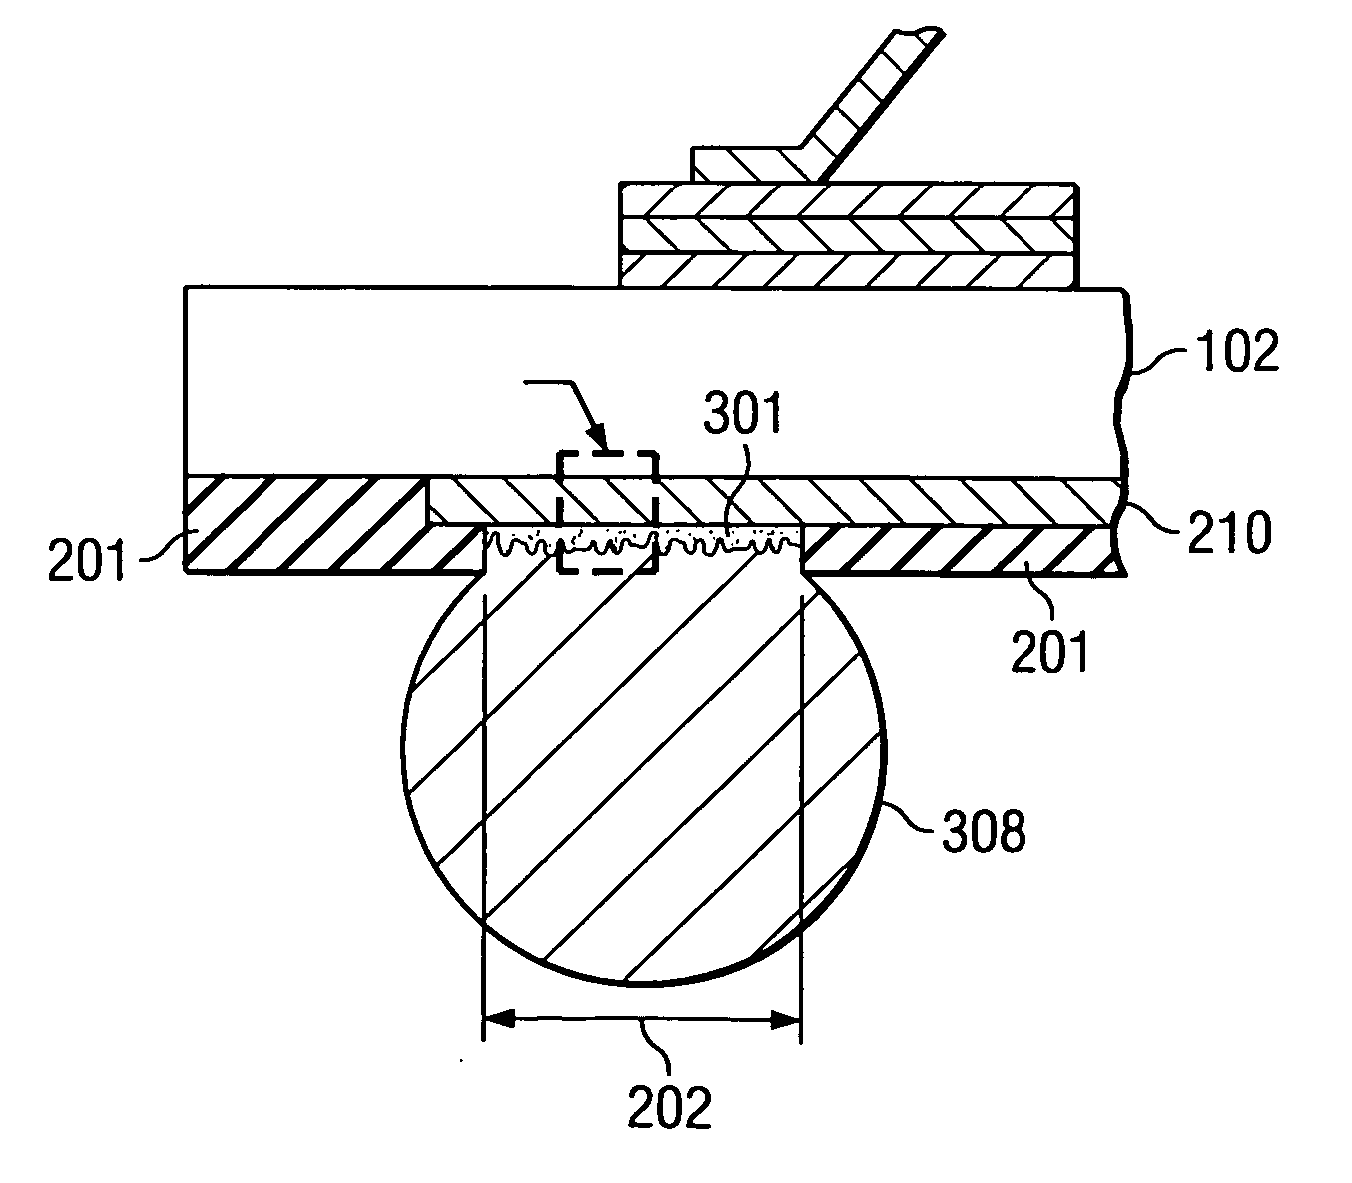 Semiconductor device having improved mechanical and thermal reliability